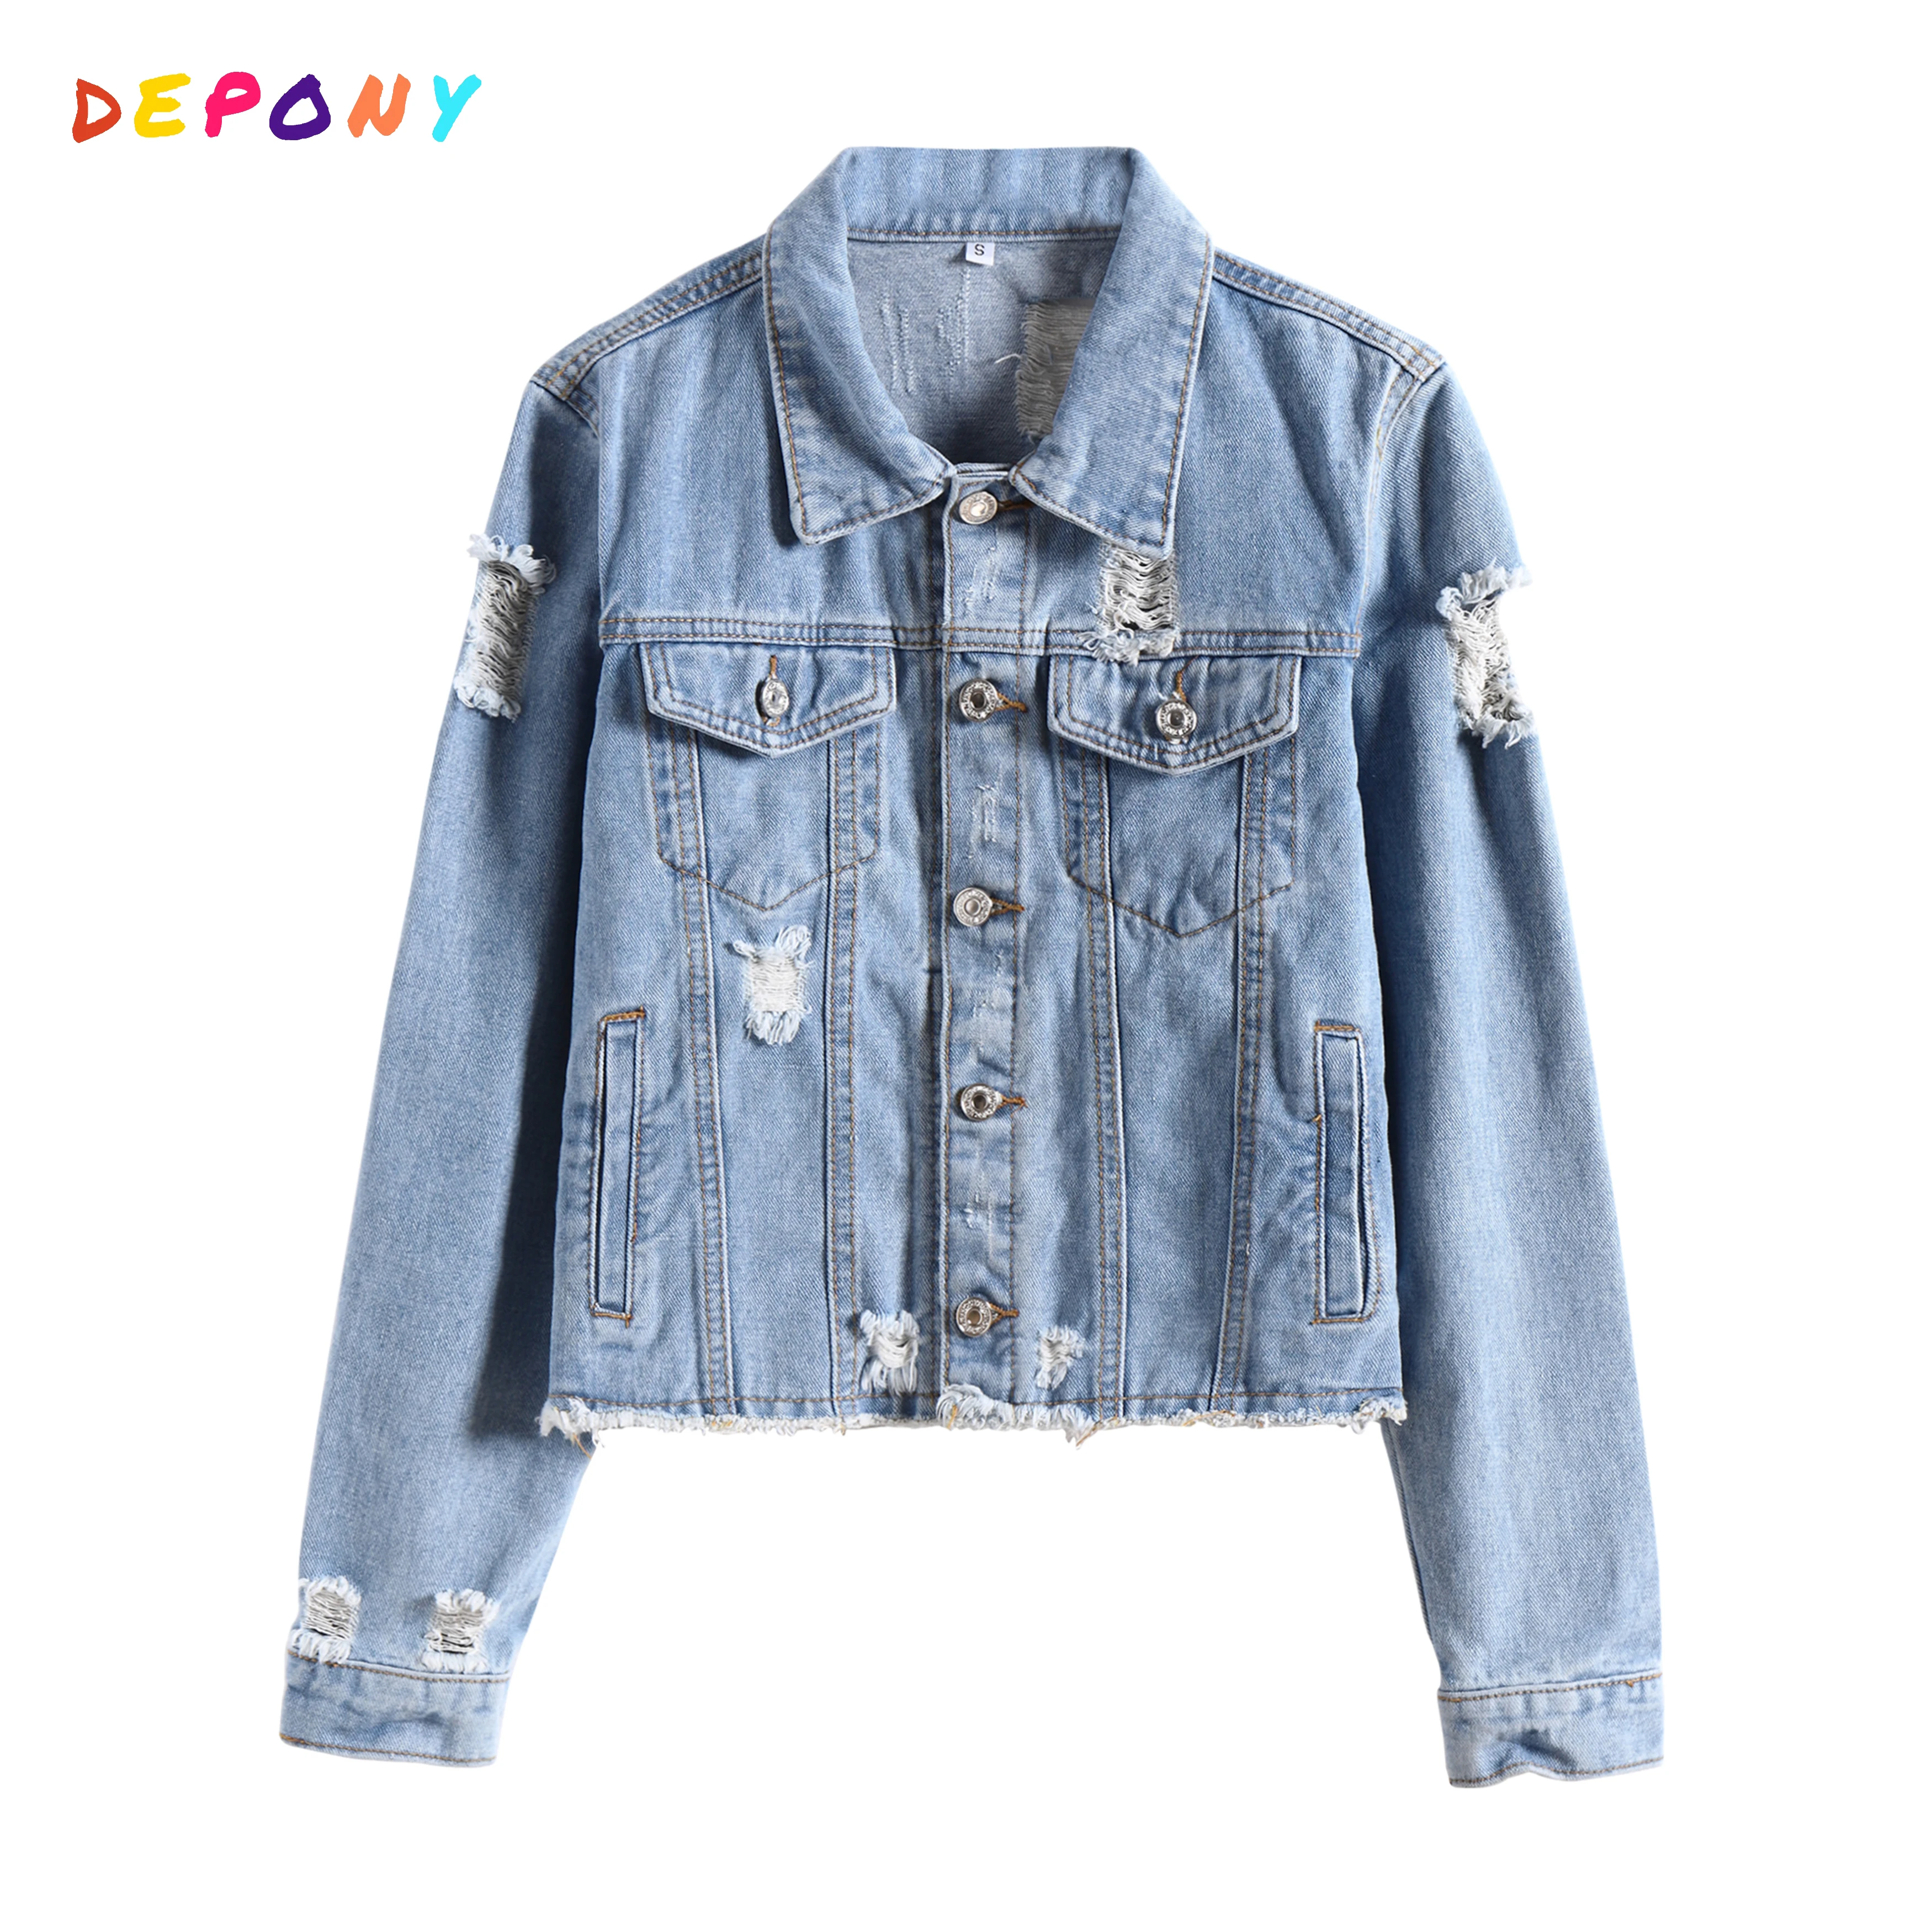 2020 DEPONY women Ripped Denim jacket autumn cropped Blue chaqueta Single Breasted Casual Loose jacket bomber